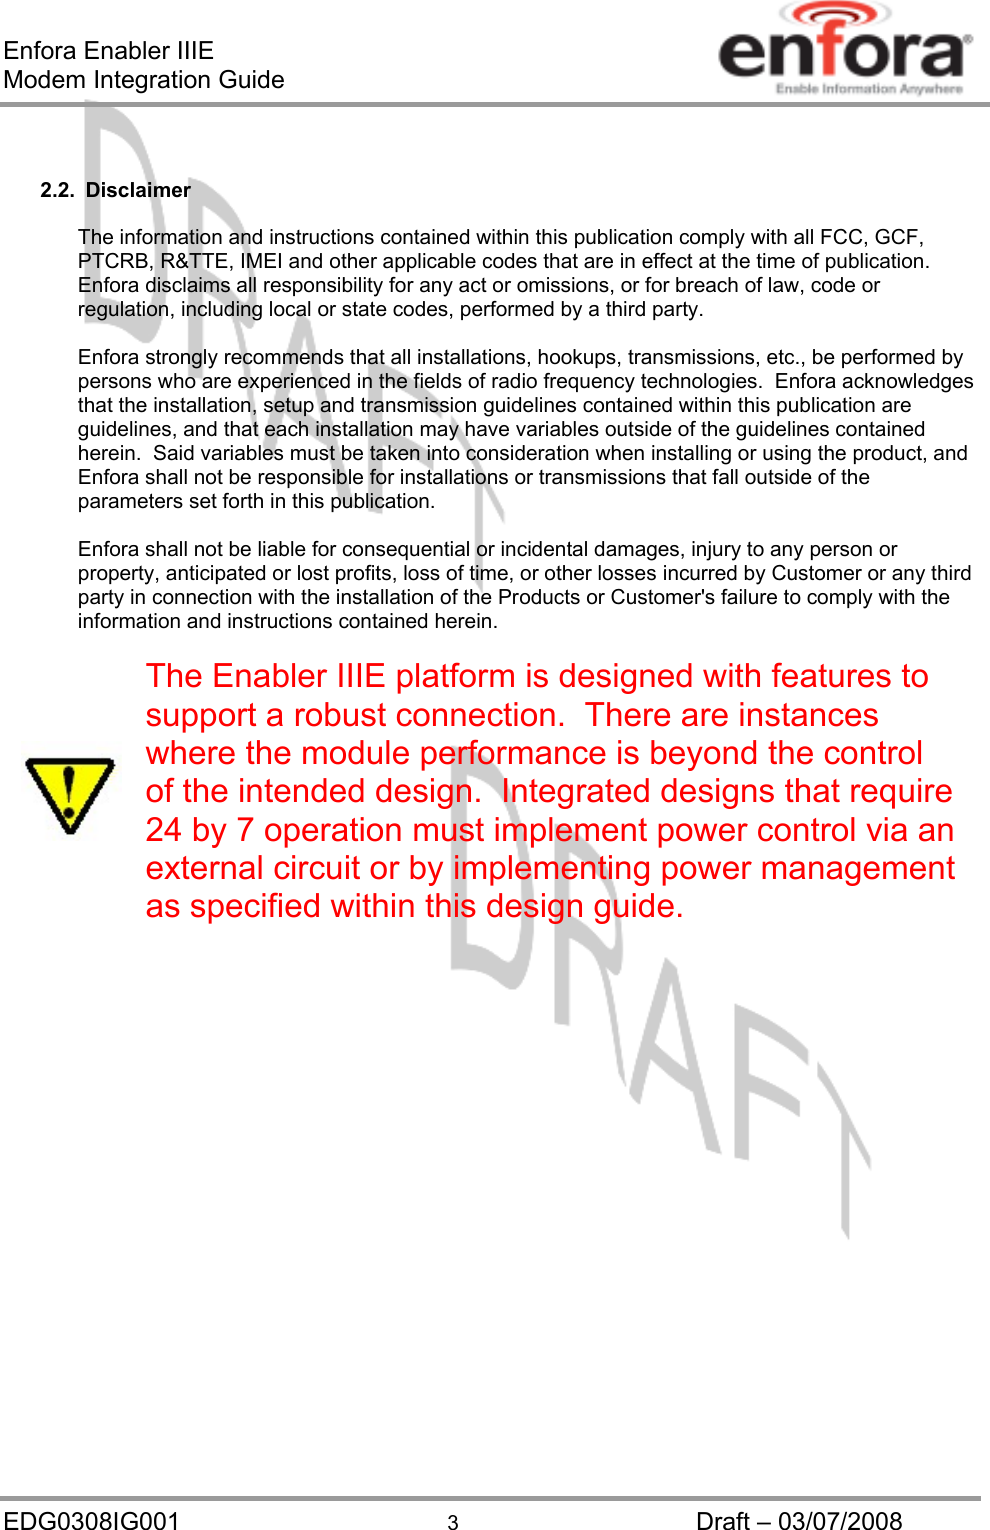 Enfora Enabler IIIE Modem Integration Guide   2.2. Disclaimer  The information and instructions contained within this publication comply with all FCC, GCF, PTCRB, R&amp;TTE, IMEI and other applicable codes that are in effect at the time of publication.  Enfora disclaims all responsibility for any act or omissions, or for breach of law, code or regulation, including local or state codes, performed by a third party.  Enfora strongly recommends that all installations, hookups, transmissions, etc., be performed by persons who are experienced in the fields of radio frequency technologies.  Enfora acknowledges that the installation, setup and transmission guidelines contained within this publication are guidelines, and that each installation may have variables outside of the guidelines contained herein.  Said variables must be taken into consideration when installing or using the product, and Enfora shall not be responsible for installations or transmissions that fall outside of the parameters set forth in this publication.  Enfora shall not be liable for consequential or incidental damages, injury to any person or property, anticipated or lost profits, loss of time, or other losses incurred by Customer or any third party in connection with the installation of the Products or Customer&apos;s failure to comply with the information and instructions contained herein.  The Enabler IIIE platform is designed with features to support a robust connection.  There are instances where the module performance is beyond the control of the intended design.  Integrated designs that require 24 by 7 operation must implement power control via an external circuit or by implementing power management as specified within this design guide.       EDG0308IG001  3  Draft – 03/07/2008 